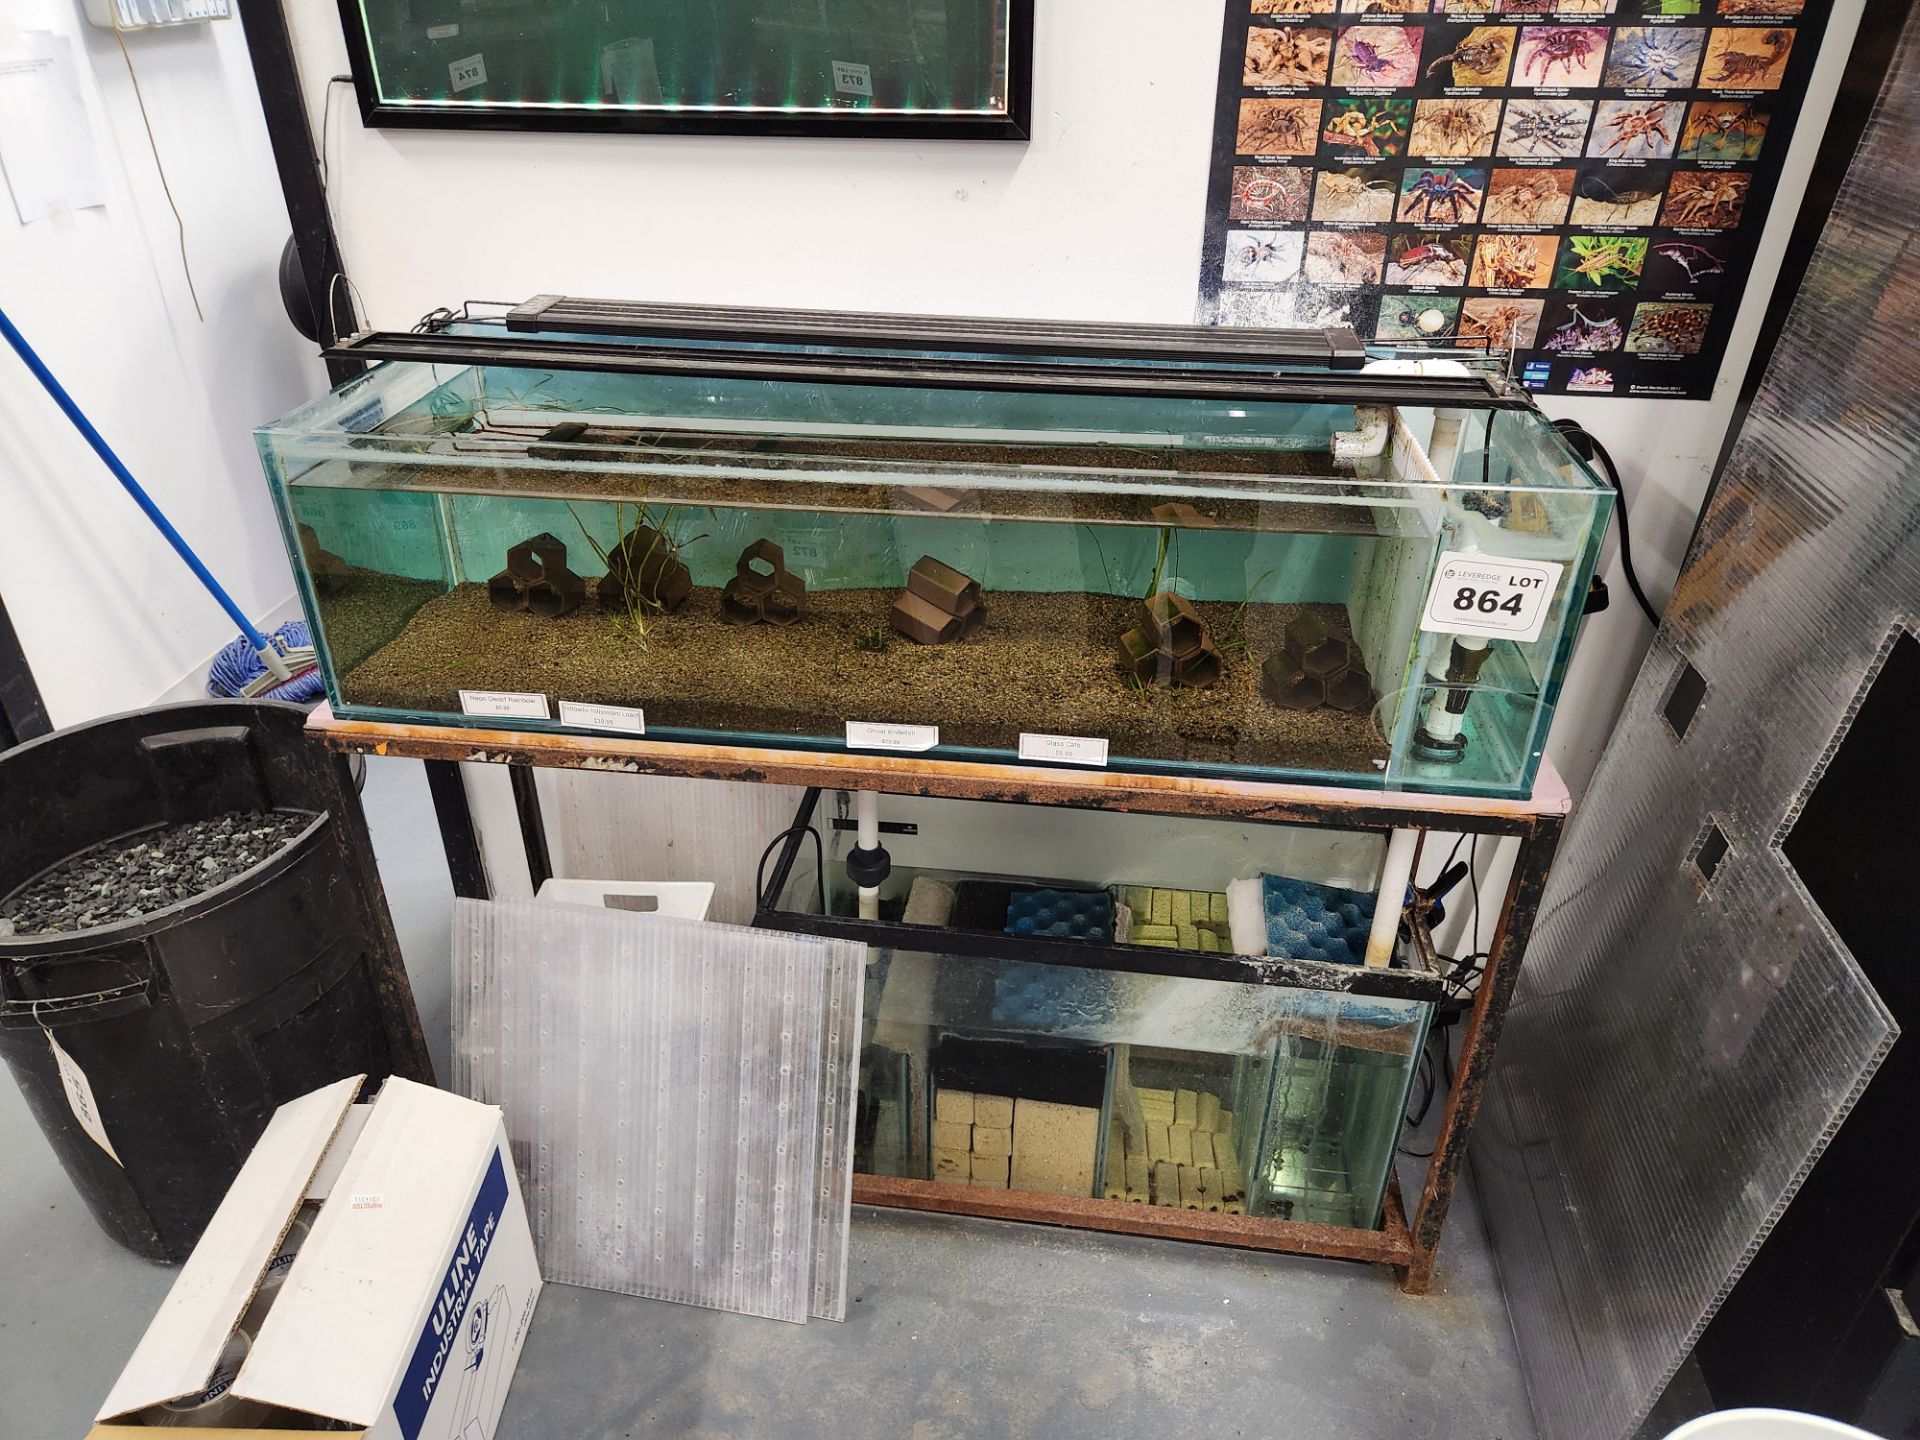 Used Aquarium approx 48"x18"x12" w/ sump filter tank and stand